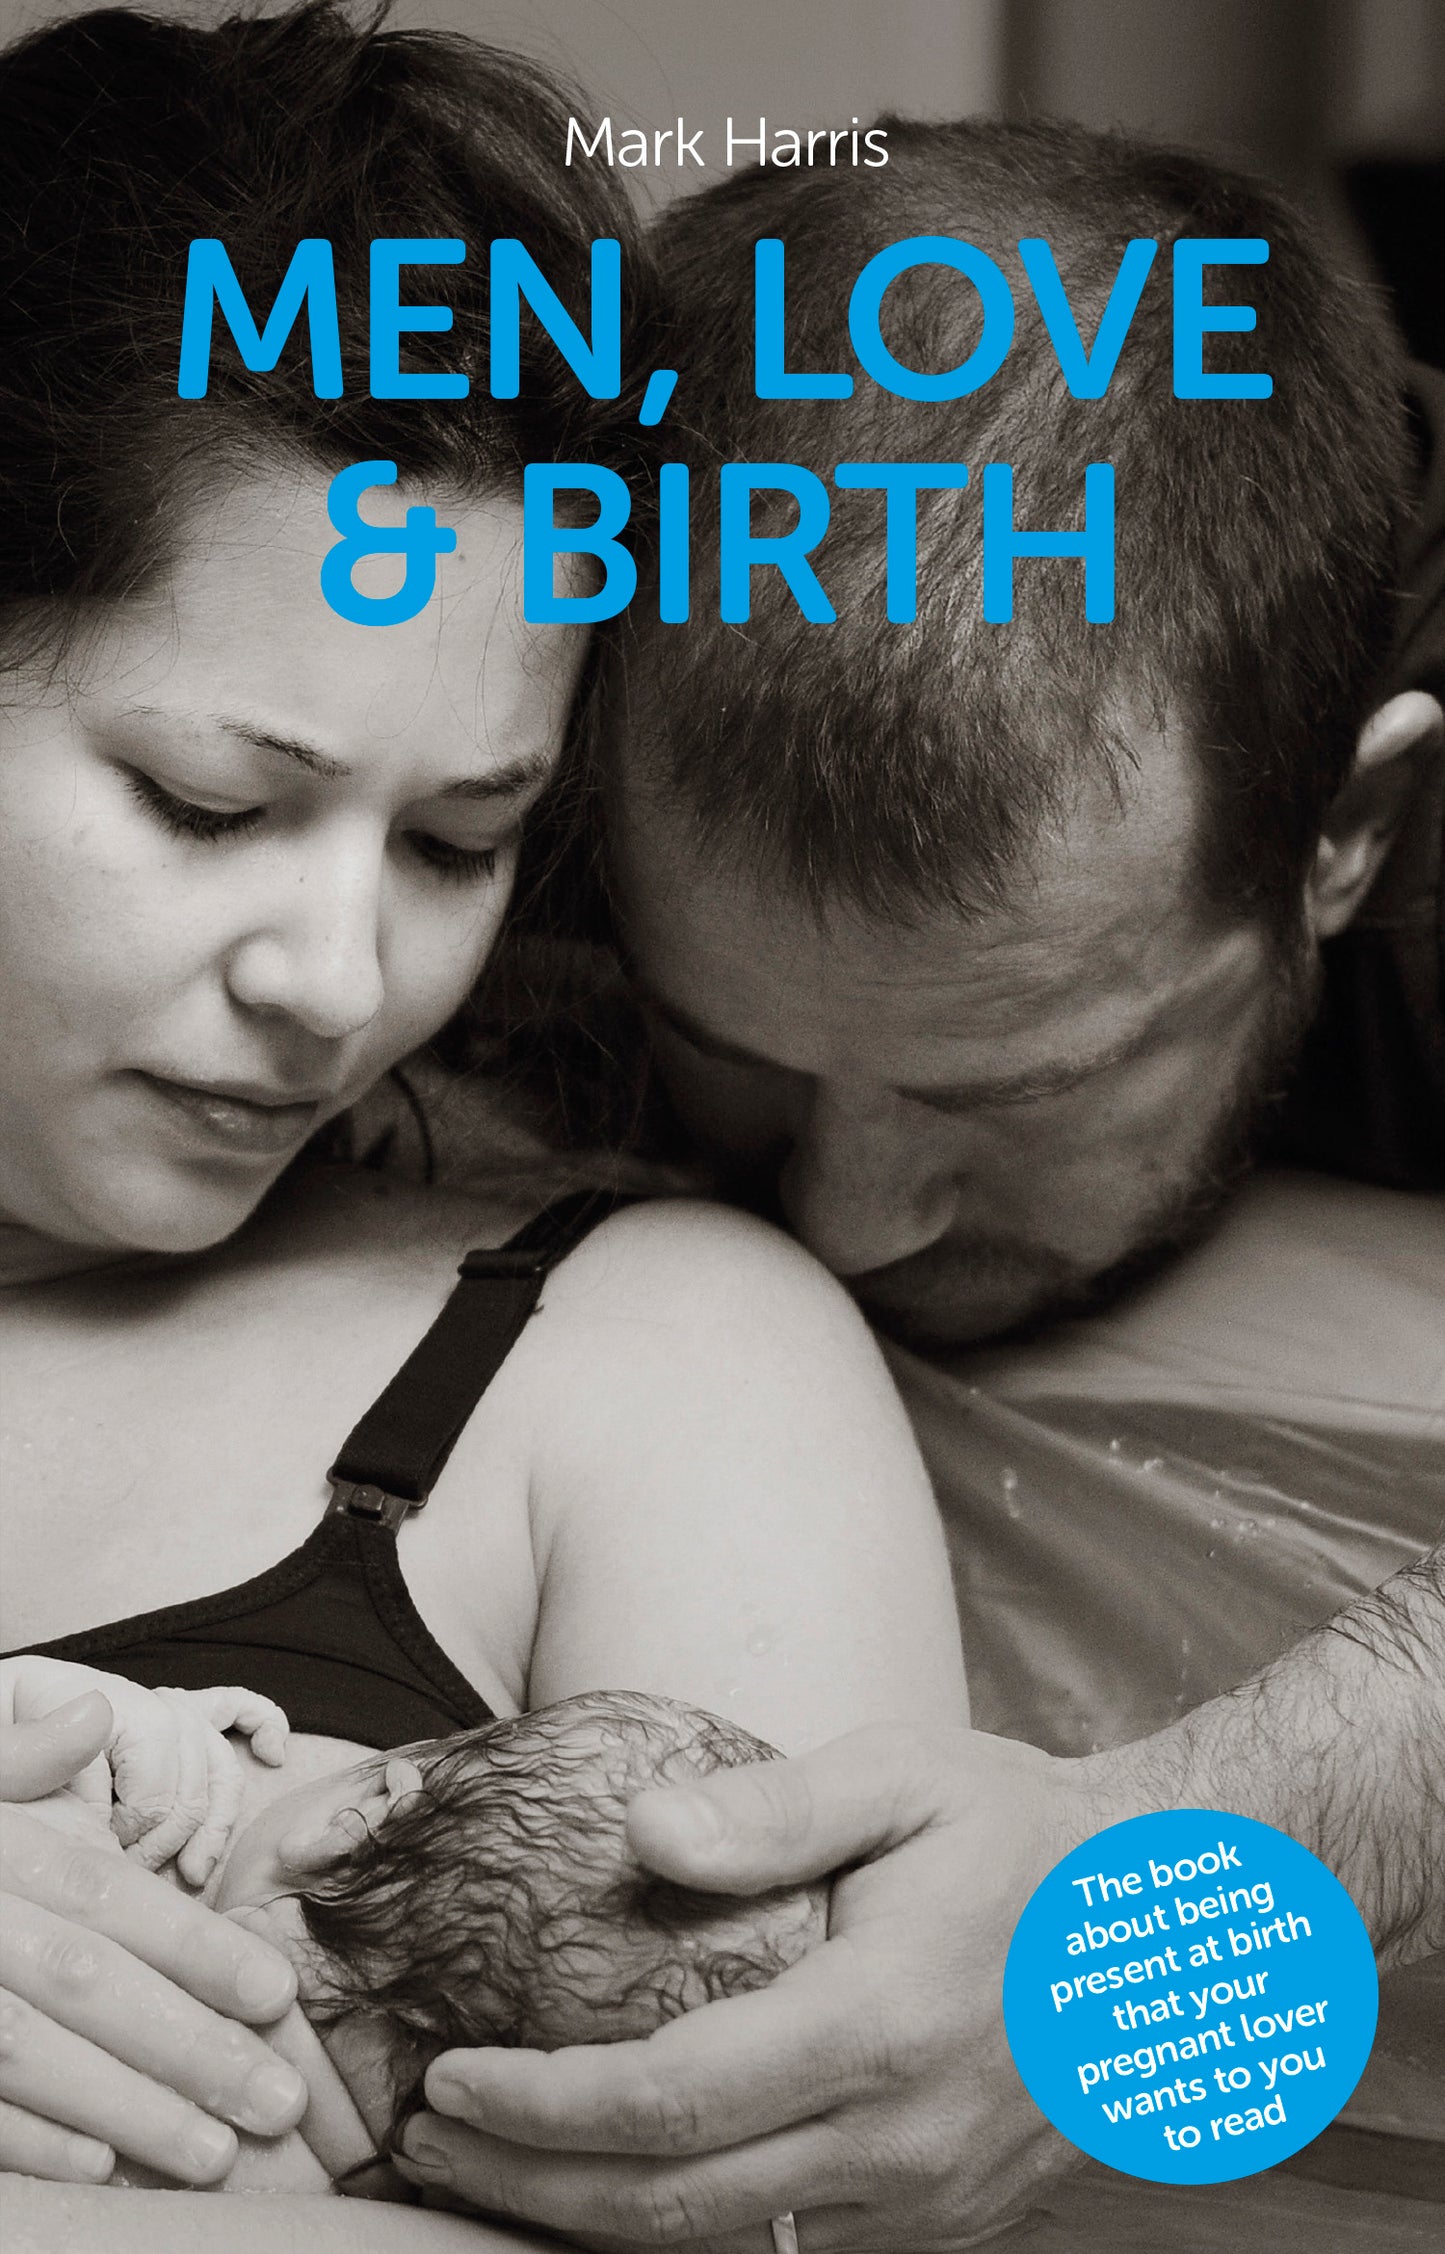 Men, Love & Birth: The book about being present at birth that your pregnant lover wants you to read